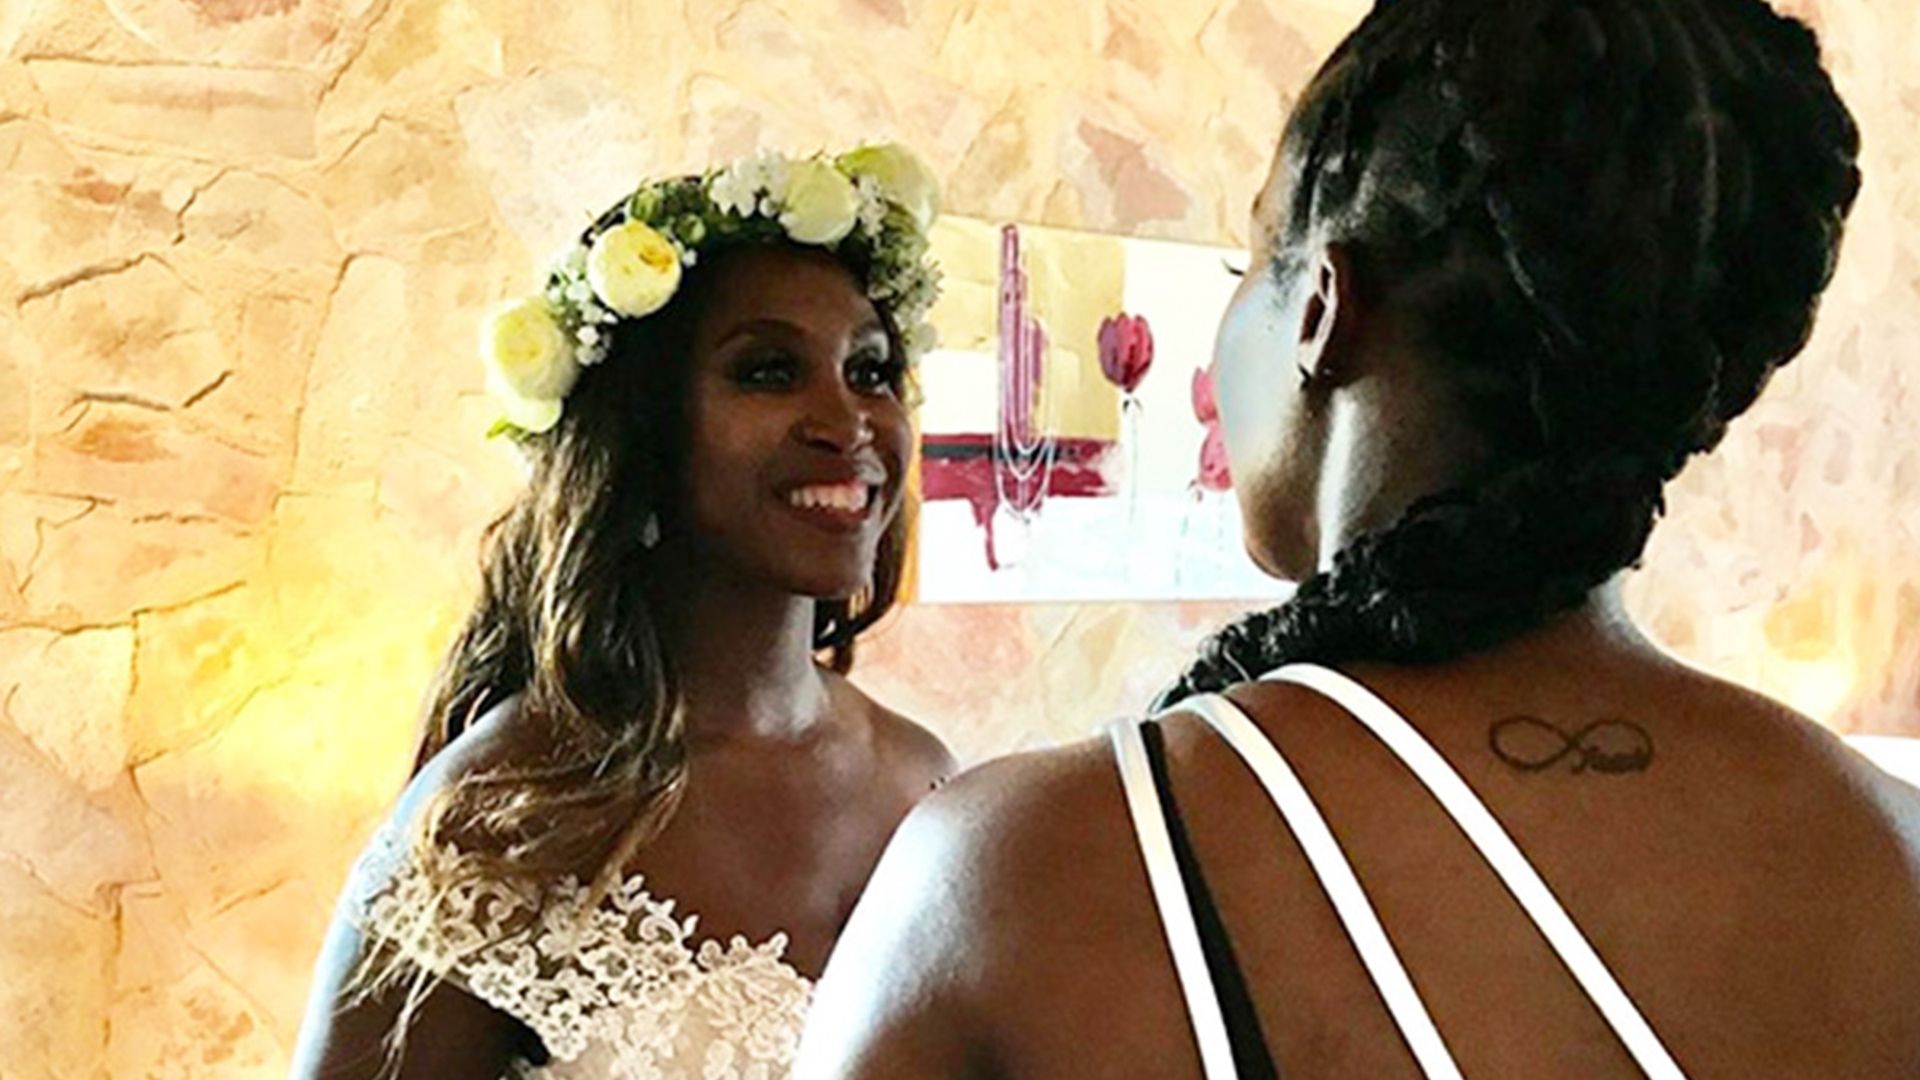 Motsi Mabuse's wedding dress is truly jaw-dropping - see photo